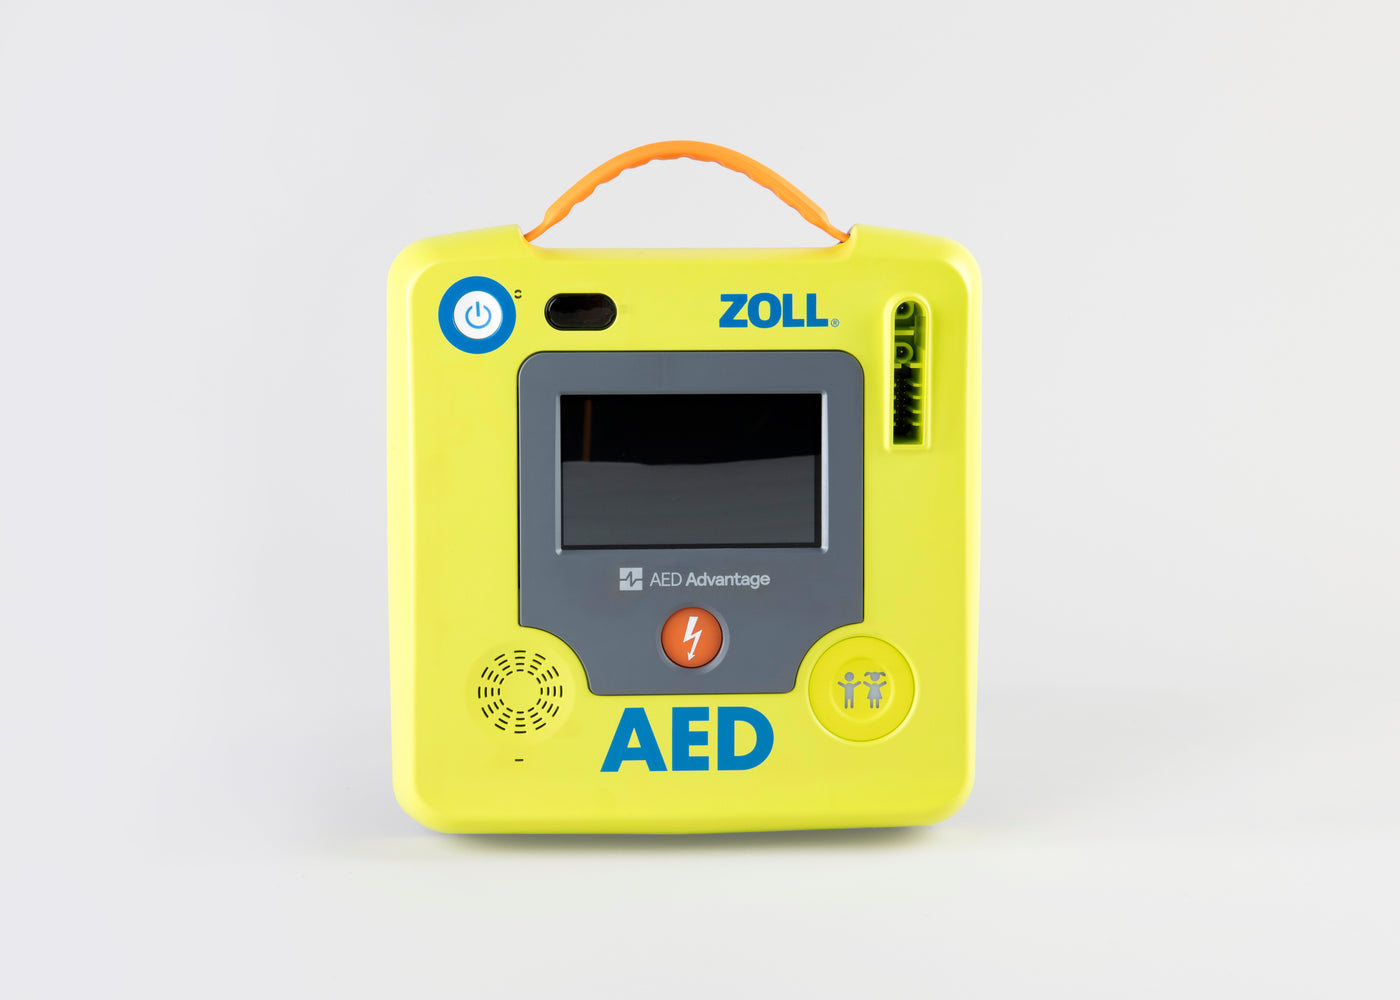 A green ZOLL AED 3 machine with an orange carry handle